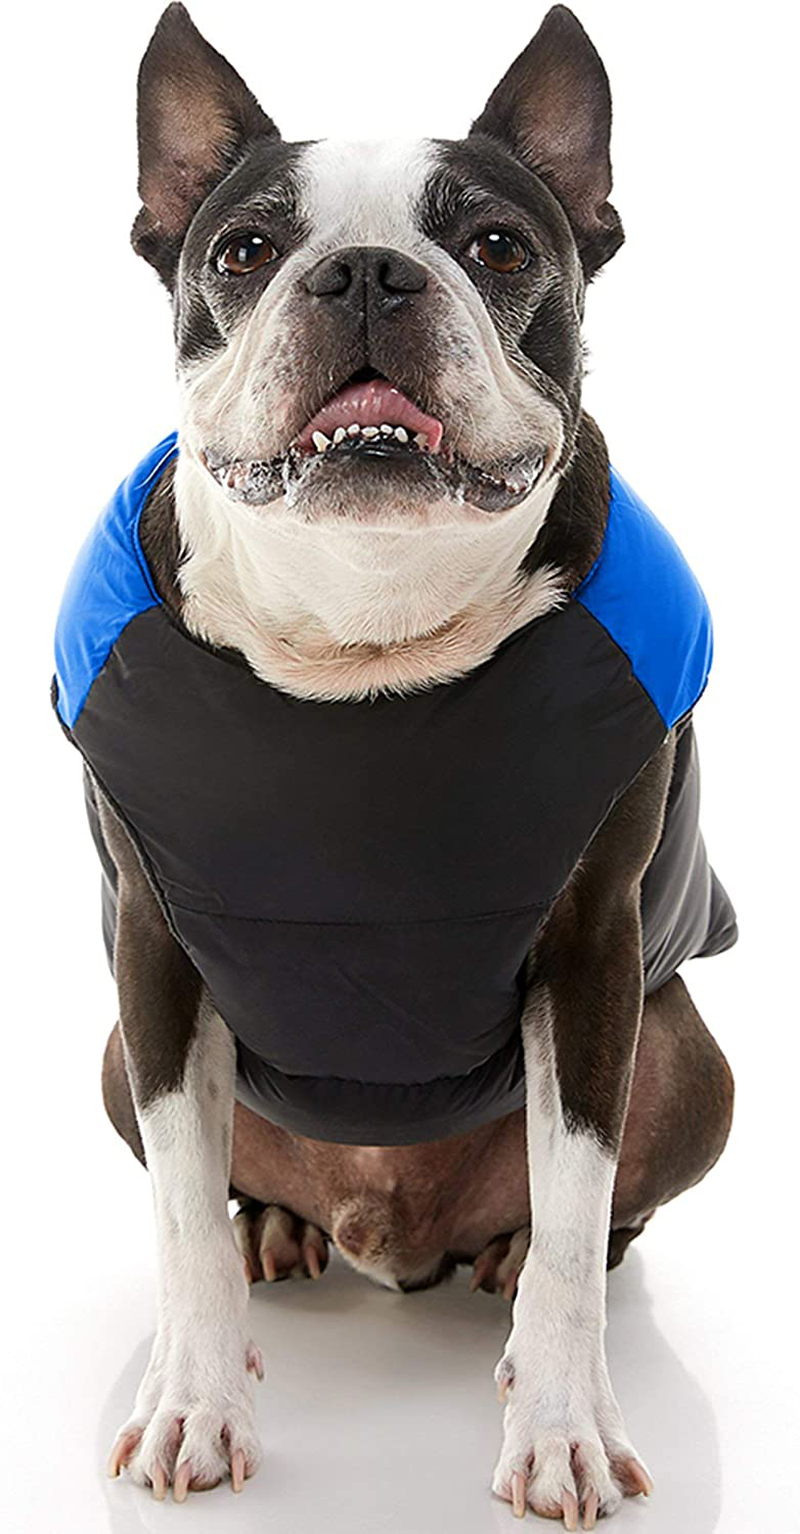 Gooby Padded Vest Dog Jacket - Warm Zip up Dog Vest Fleece Jacket with Dual D Ring Leash - Winter Water Resistant Small Dog Sweater - Dog Clothes for Small Dogs Boy and Medium Dogs for Everyday Use Animals & Pet Supplies > Pet Supplies > Dog Supplies > Dog Apparel Gooby   